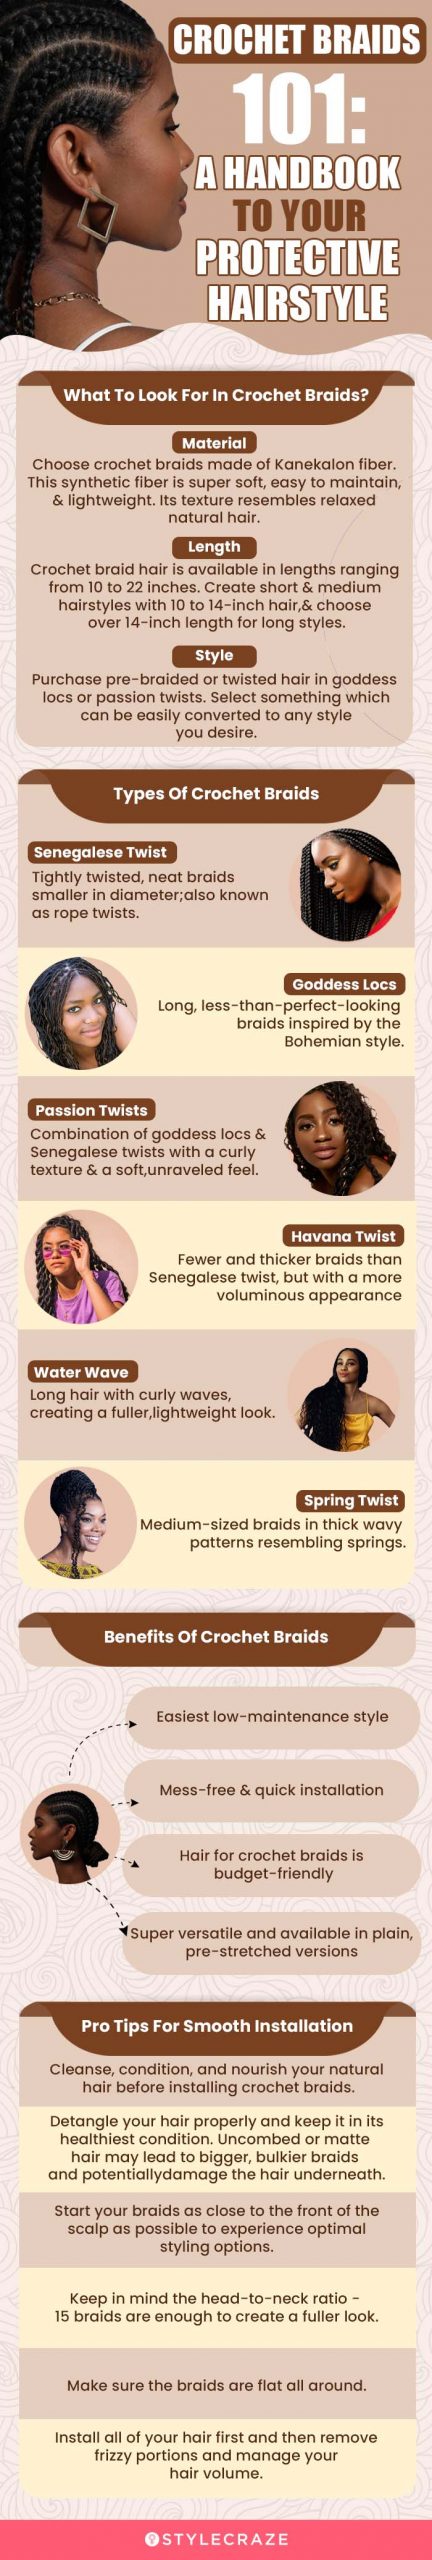 Crochet Braids 101: A Handbook To Your Protective Hairstyle (infographic)